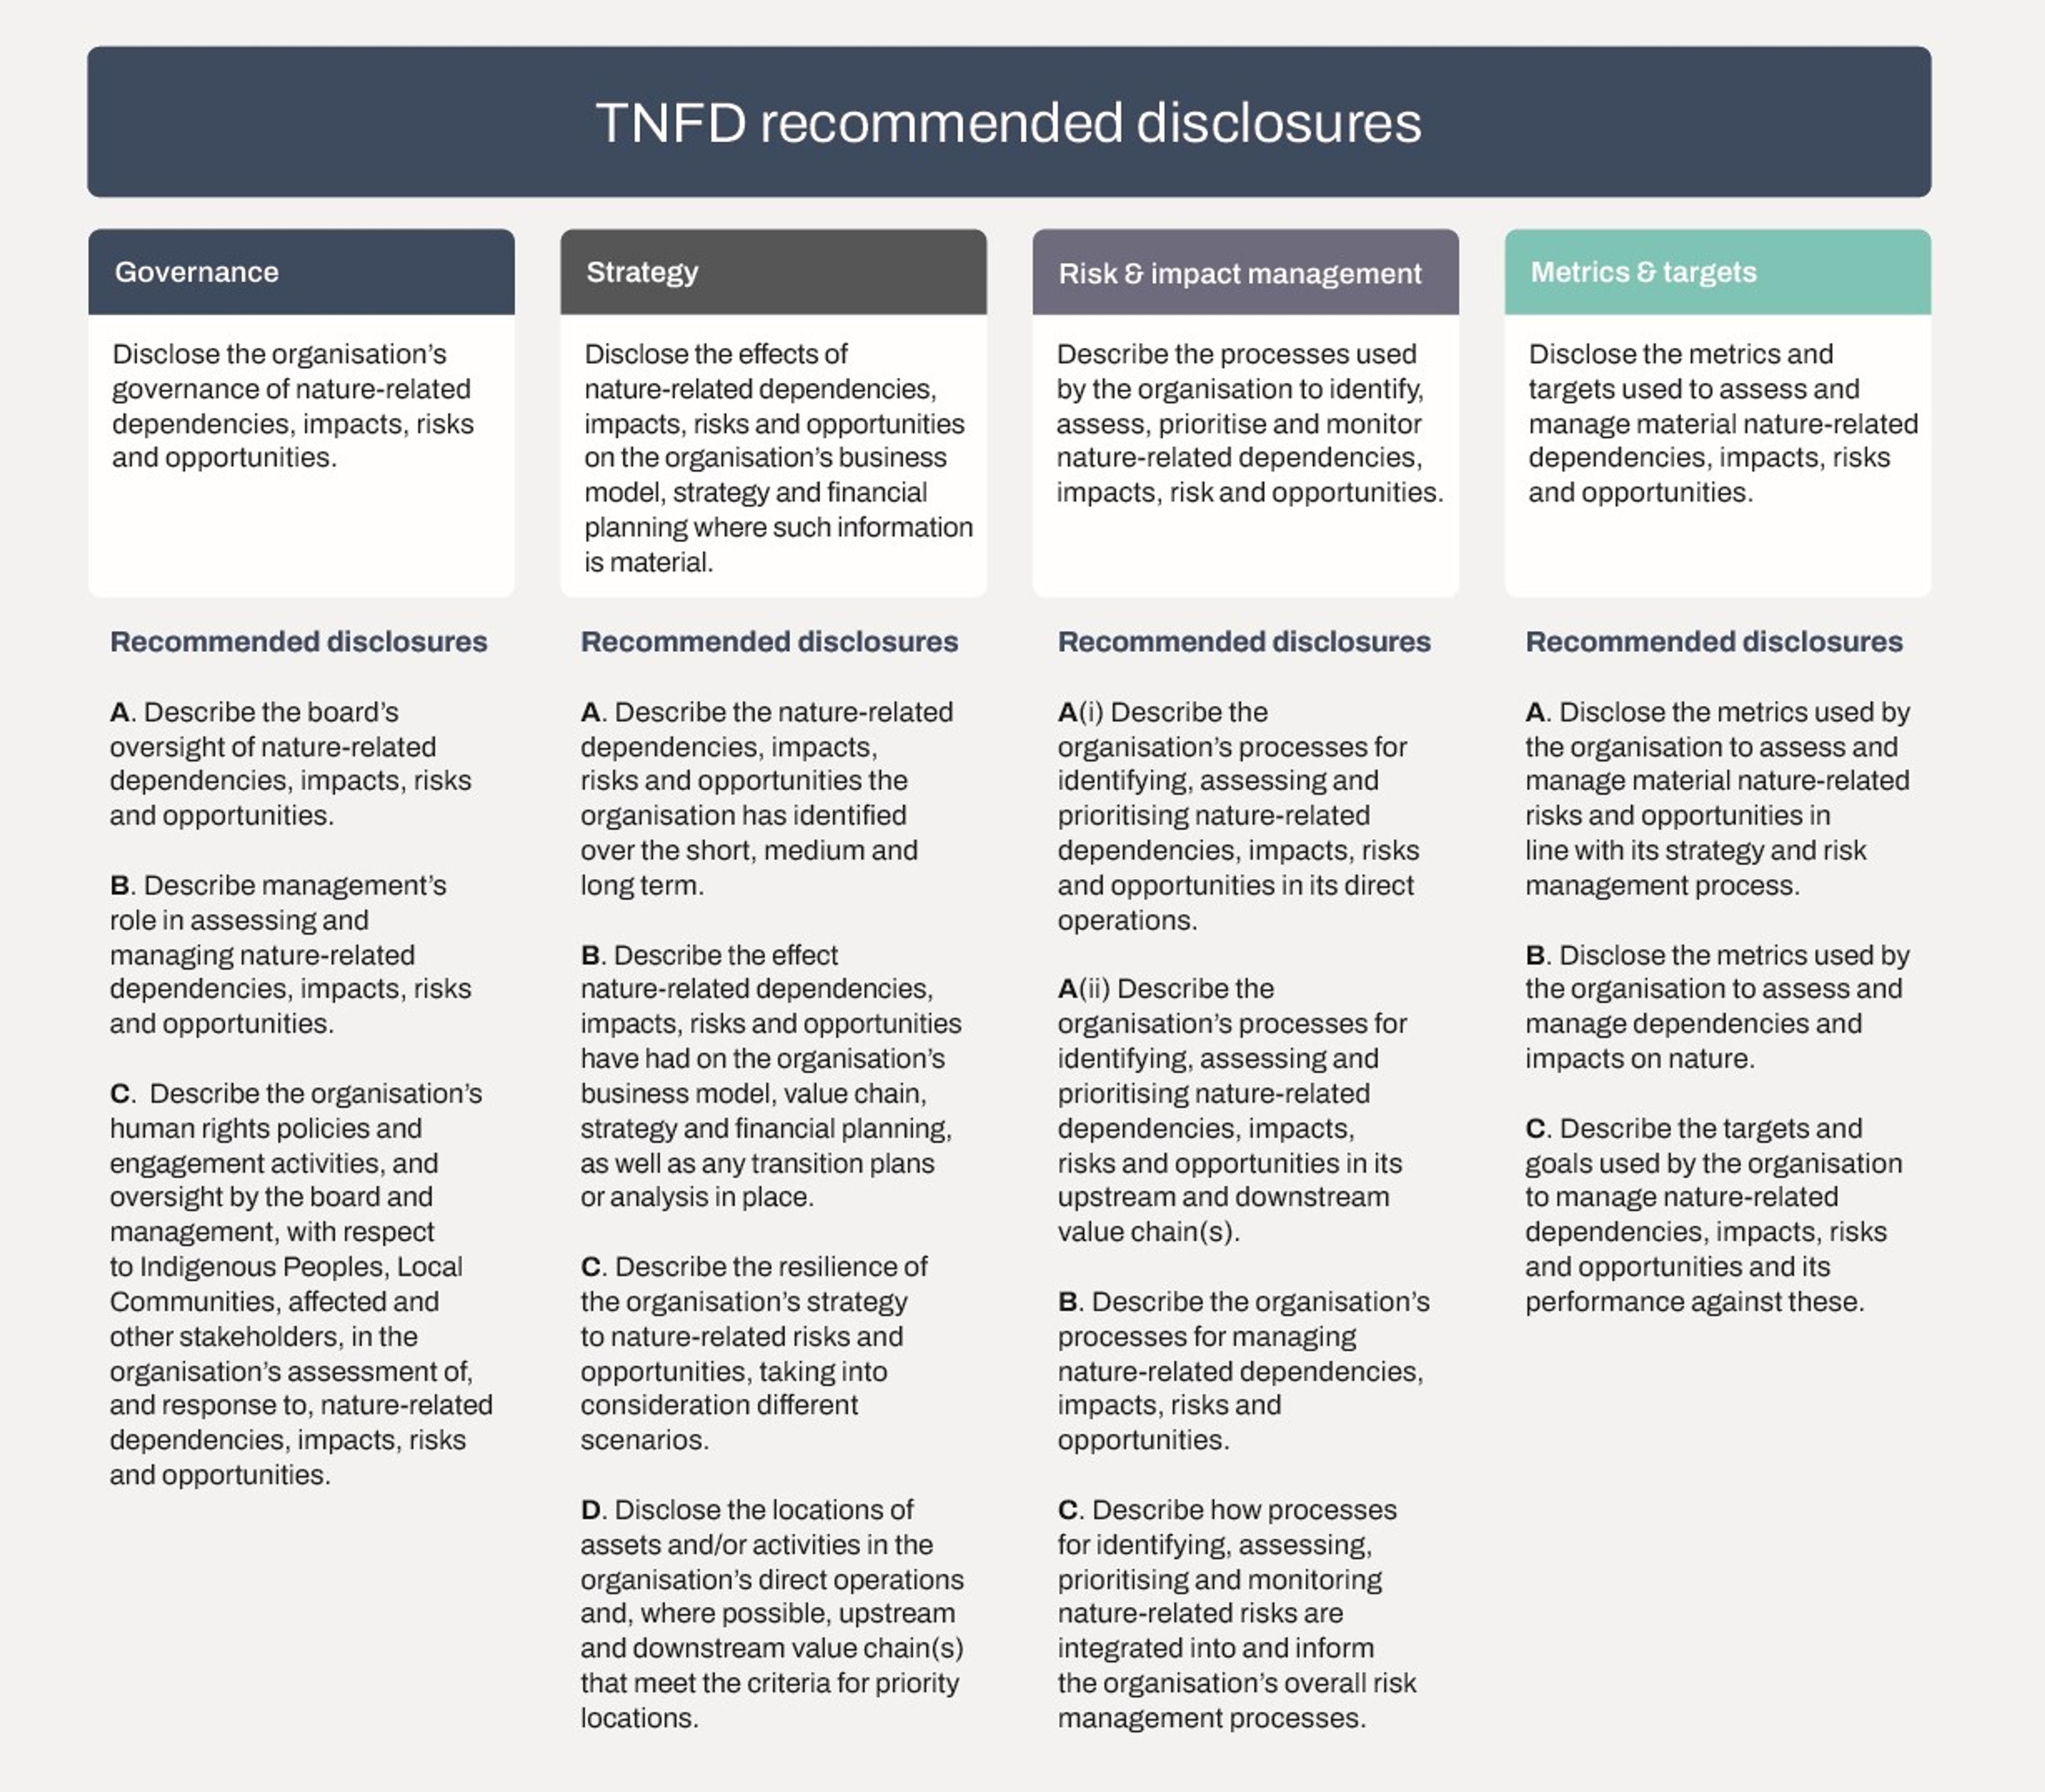 Diagram of the TNFD's final draft recommended disclosures on governance, strategy, risk and impact management, and metrics and targets